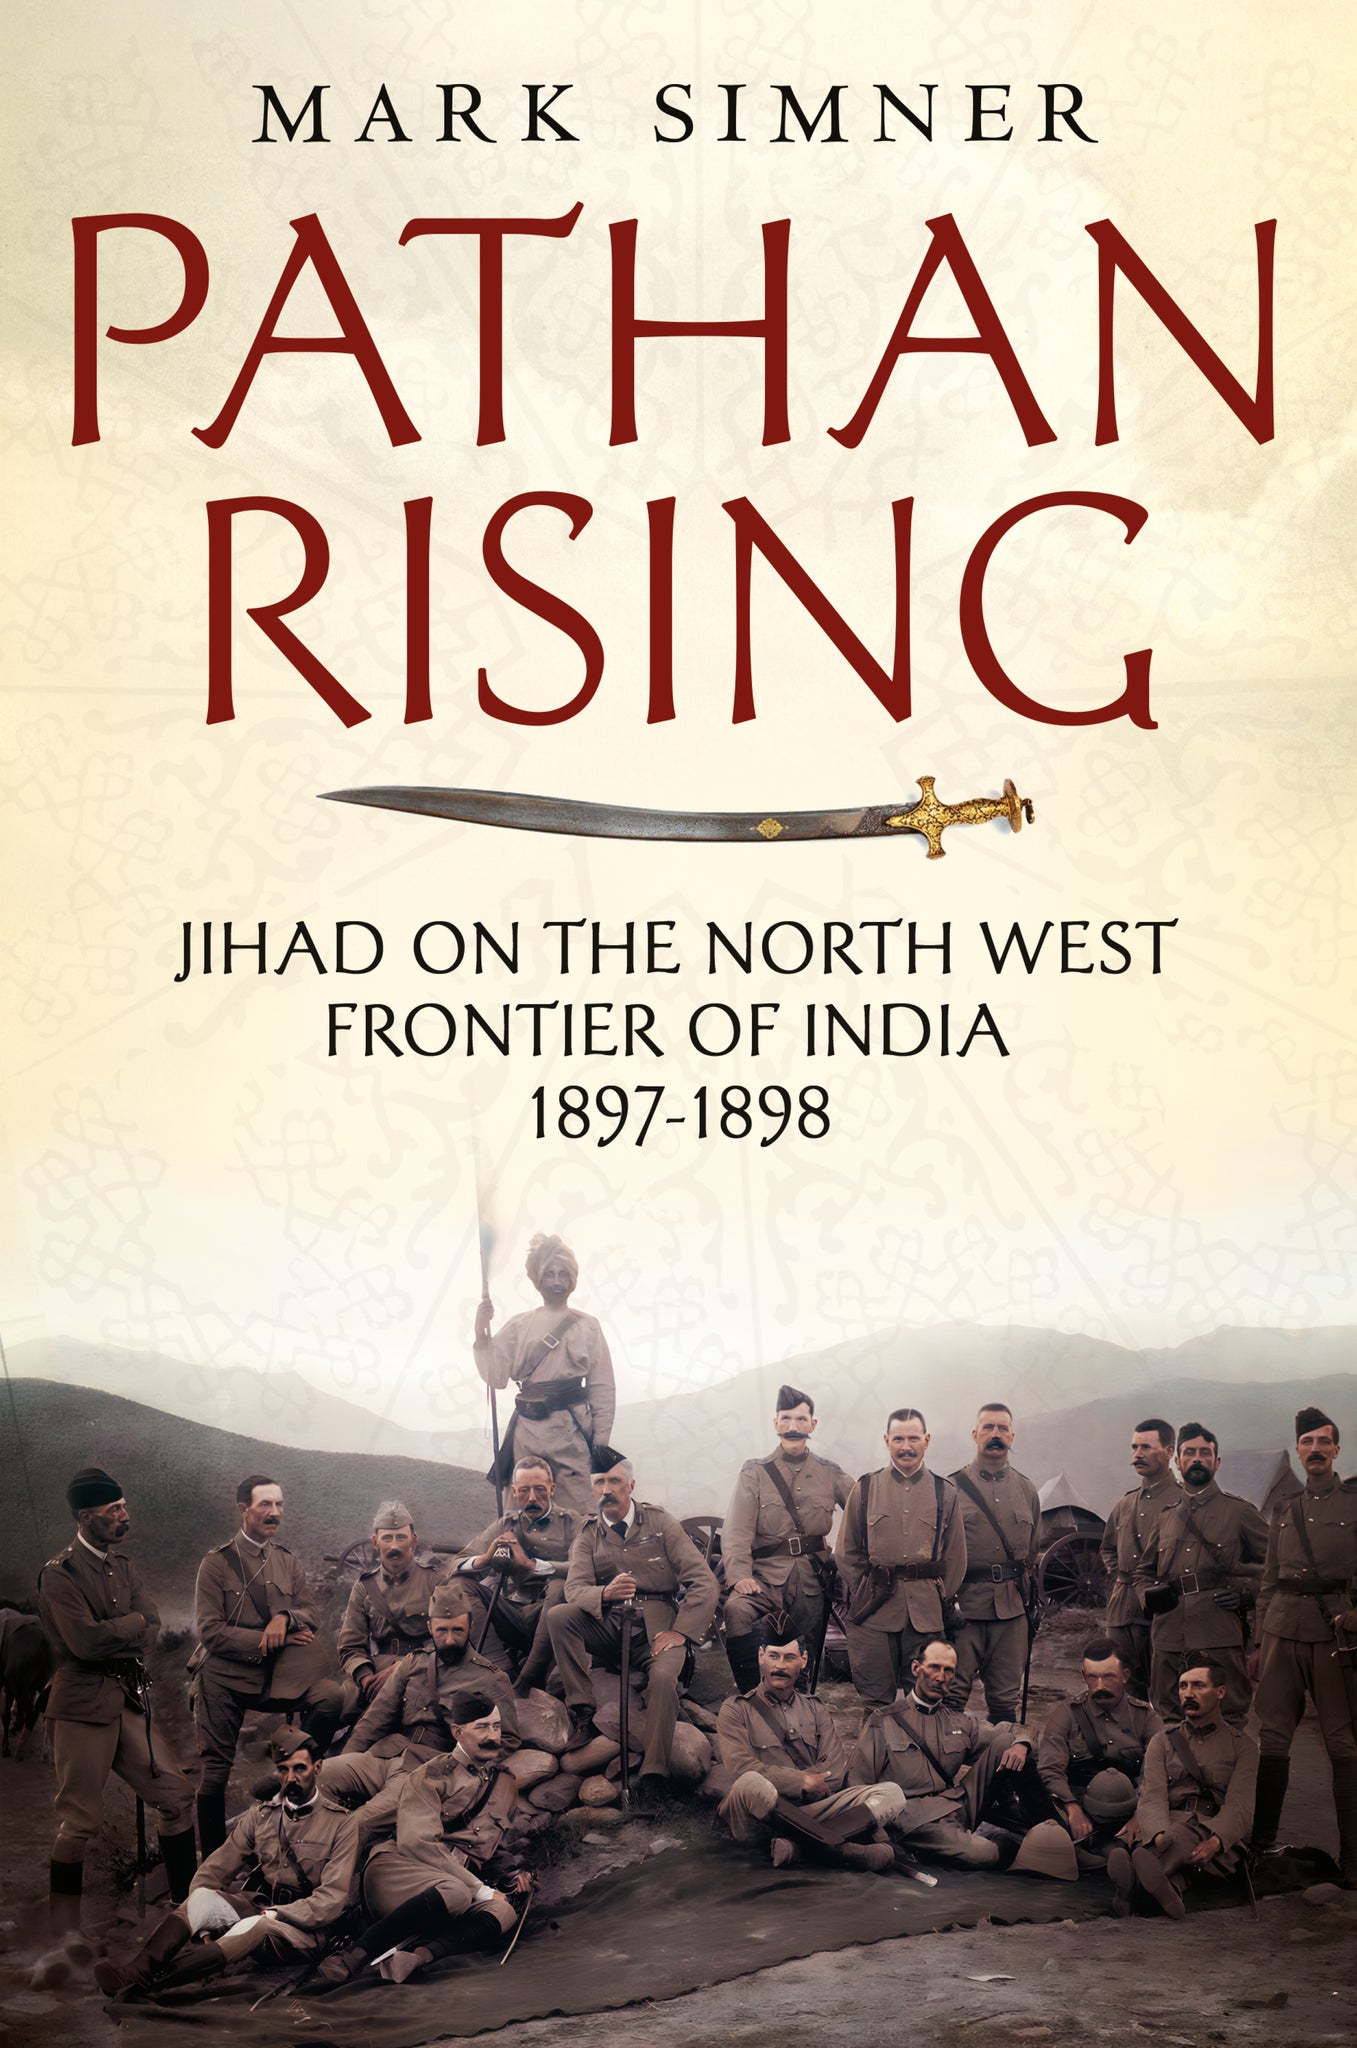 Pathan Rising: Jihad on the North West Frontier of India 1897-1898